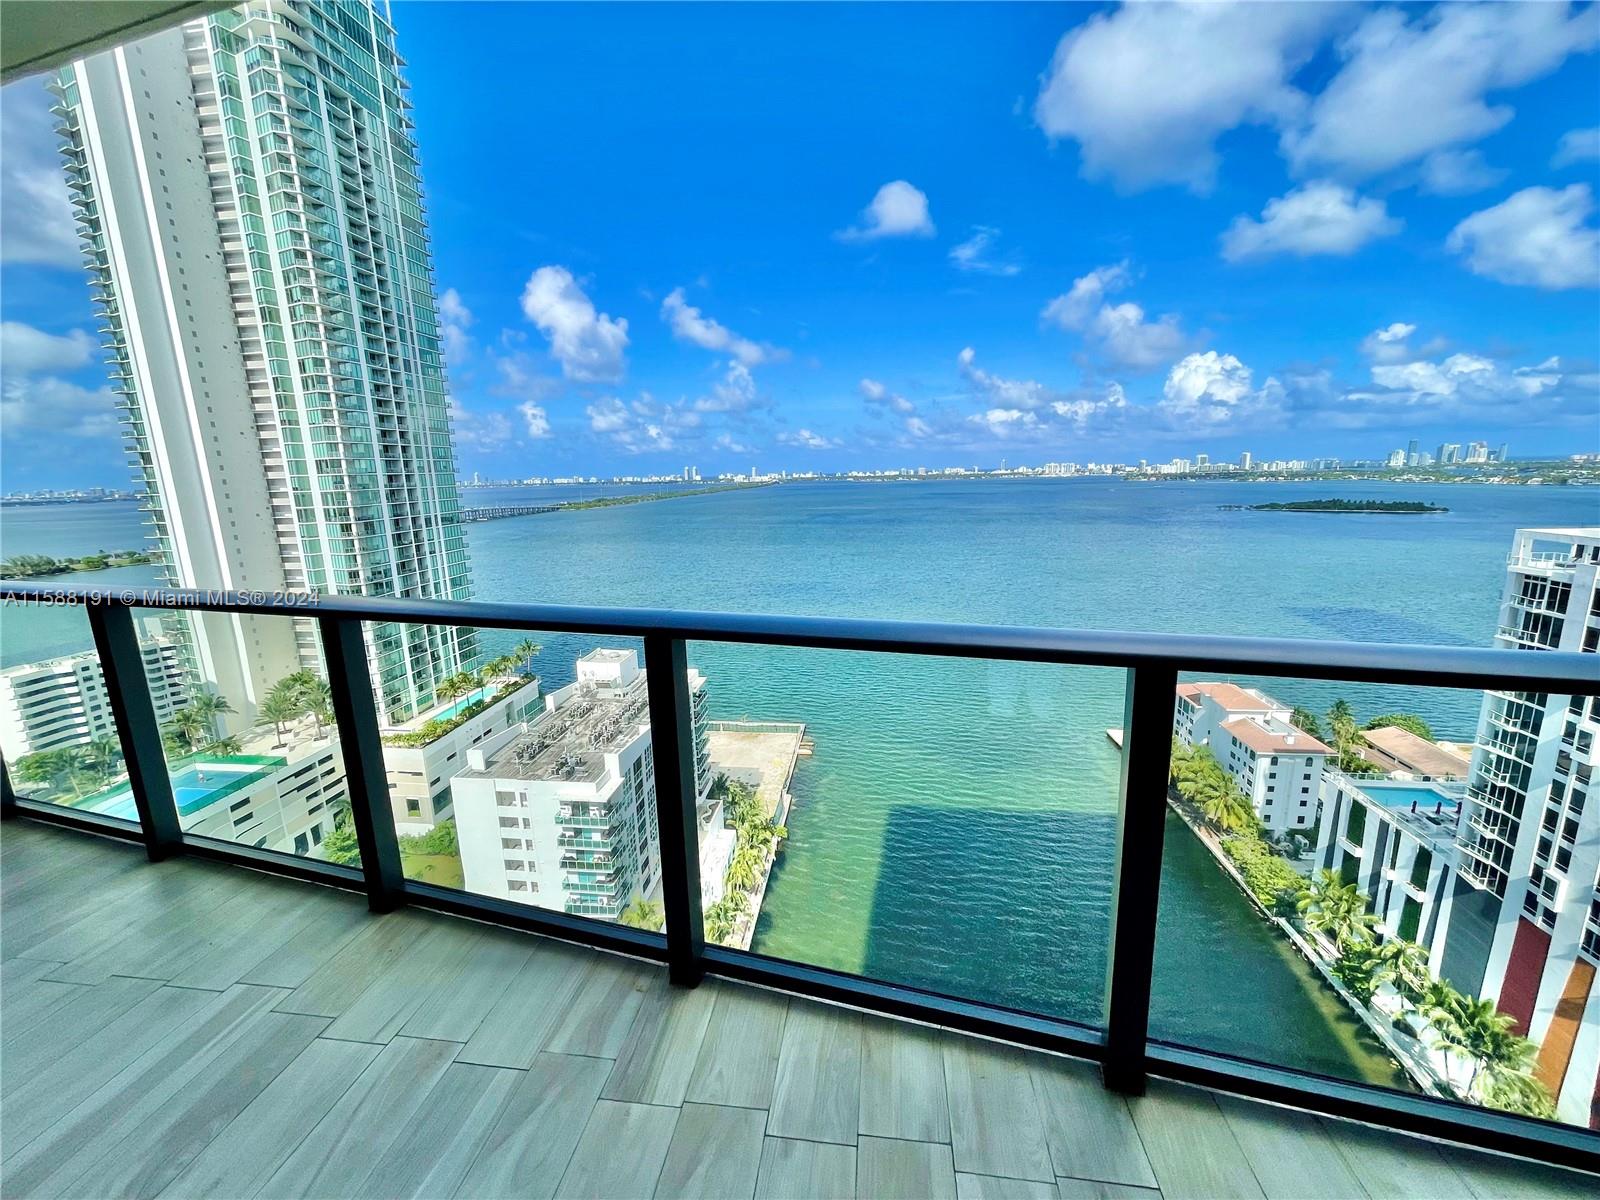 * A MUST SEE!! IMPRESSIVE PANORAMIC BAY VIEWS. NICE & COMFORTABLE APARTMENT AT ICON BAY; SPACIOUS BALCONY-TERRACE, 1 BEDROOM + SMALL DEN, 1.5 BATHROOMS. LIKE-WOOD PORCELAIN FLOORS, TWO BUILT OUT CLOSETS, BEAUTIFUL ROLLING SHADES, SPACIOUS KITCHEN, WASHER & DRYER INSIDE THE UNIT, ONE ( 1 ) ASSIGNED PARKING SPACE (# 337 ) LOCATED AT A LOW LEVEL AT PARKING GARAGE . PRIVATE ELEVATOR, PRIVATE FOYER. 180 DEGREES OF STUNNING PANORAMIC WATER VIEWS.